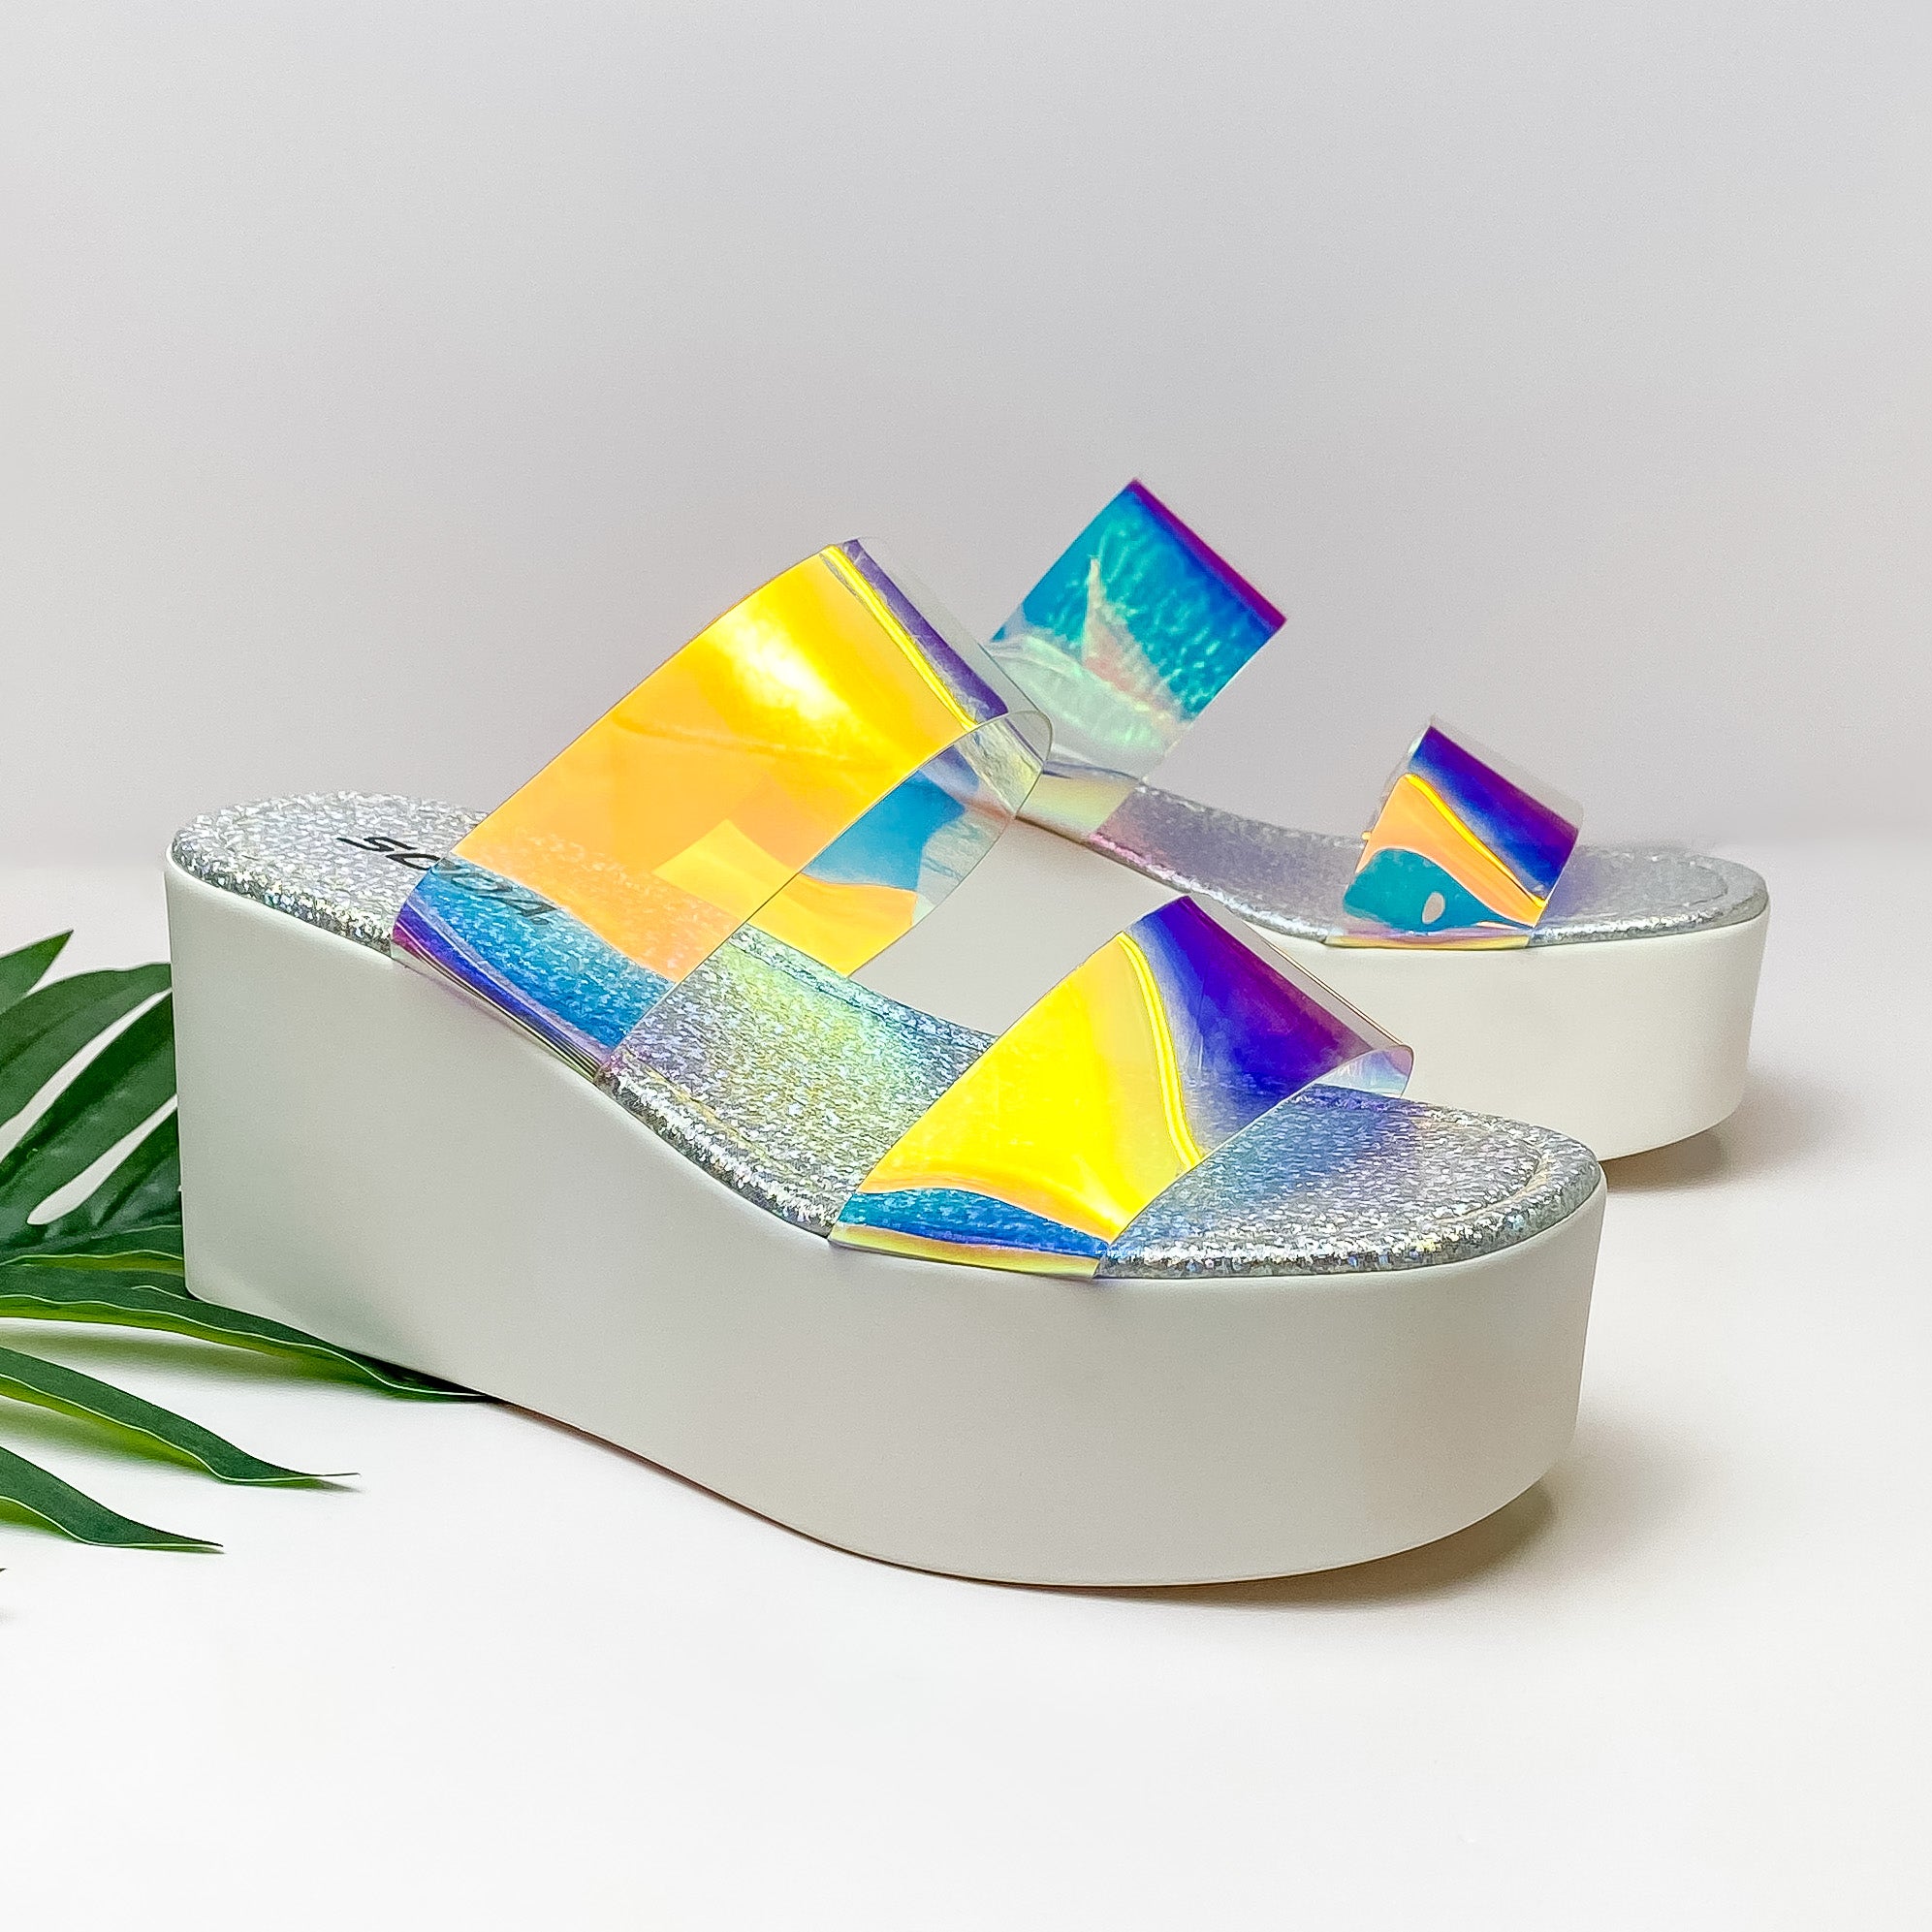 Feeling Brand New Two Strap White Platform Wedges in Iridescent - Giddy Up Glamour Boutique